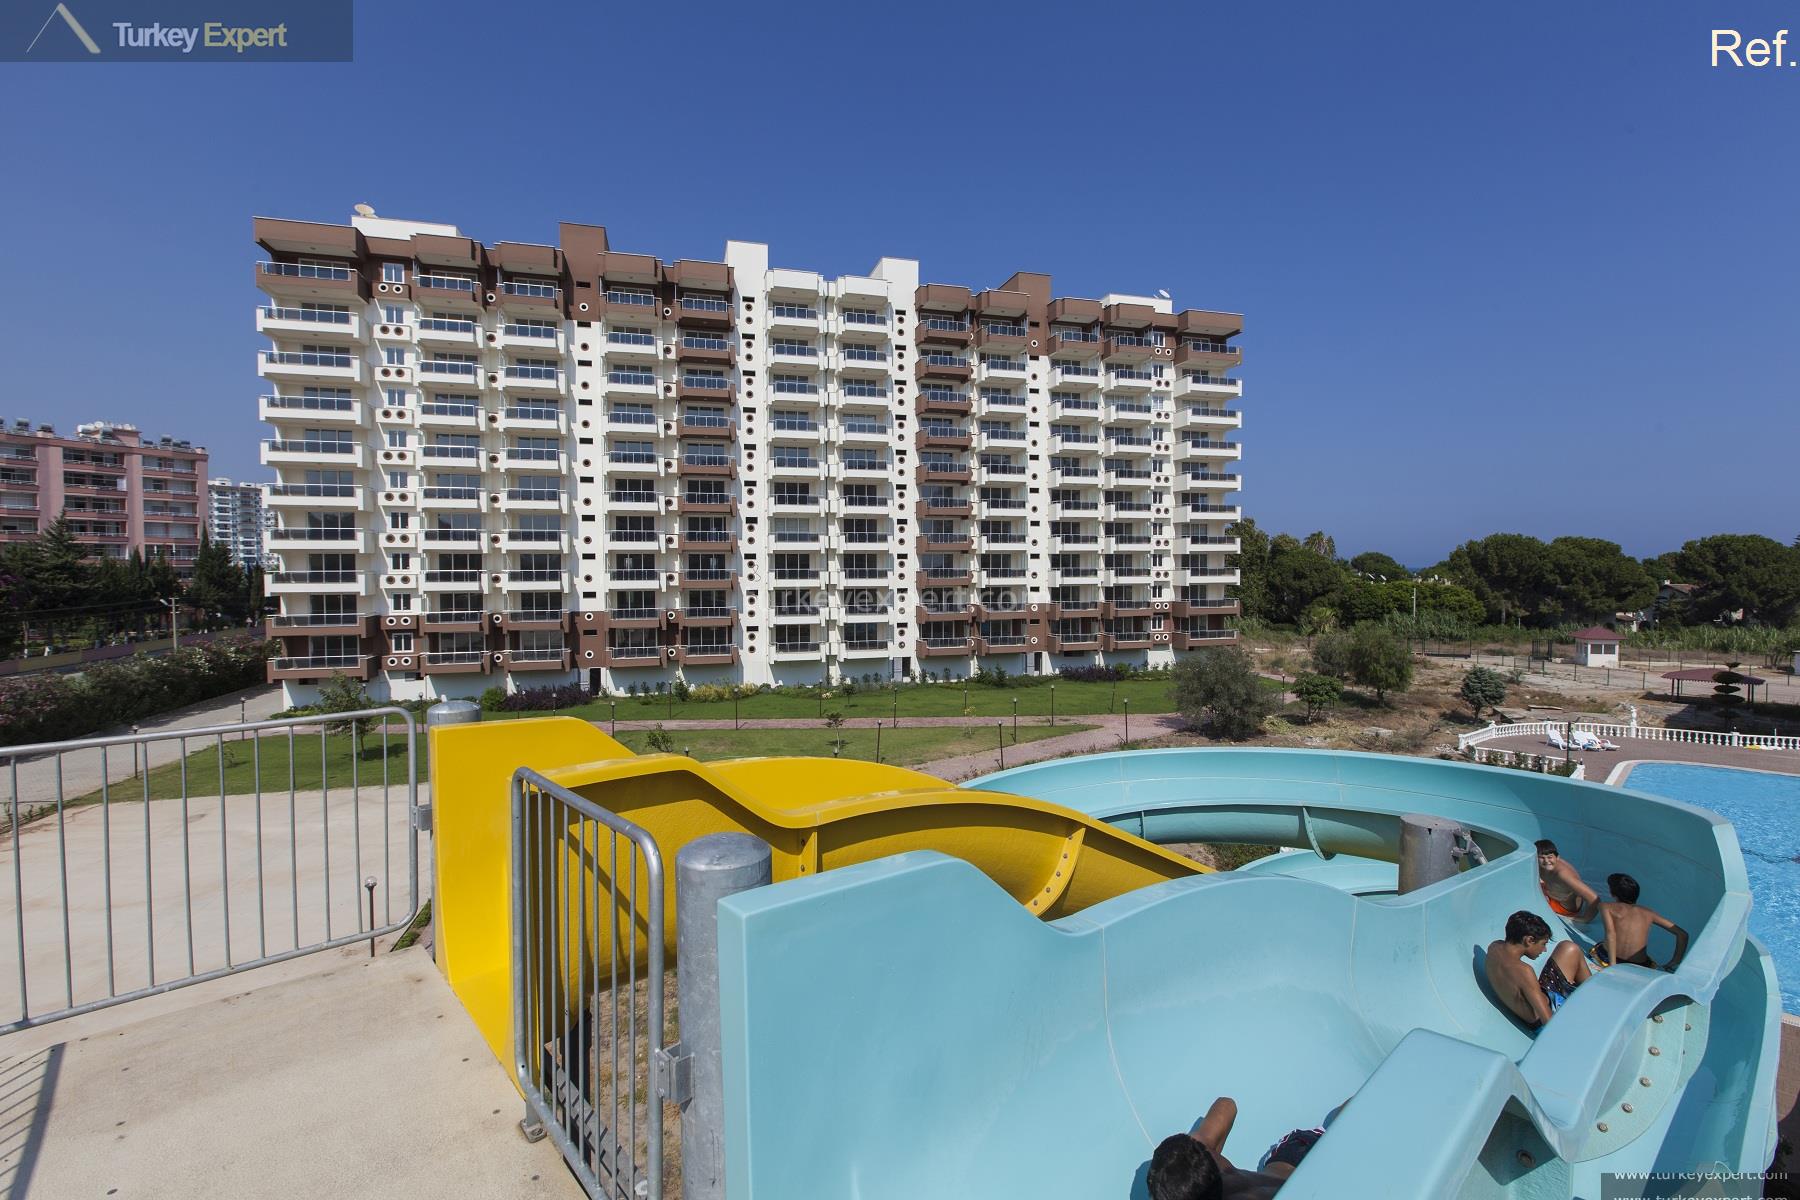 16stunning brandnew apartment inside a complex with 5 swimming pools20